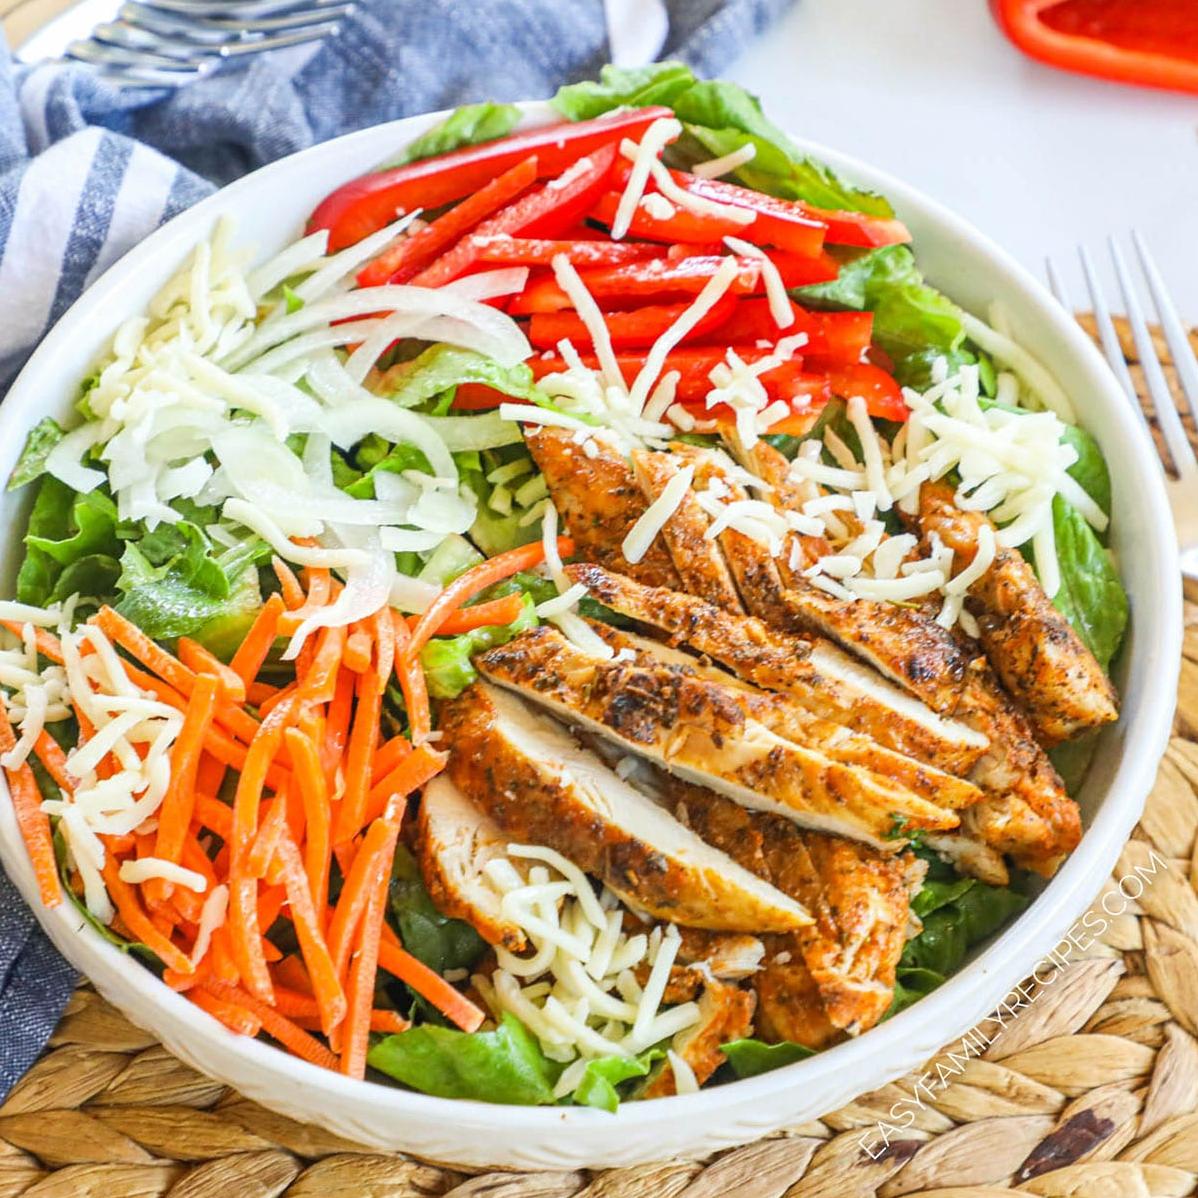  A salad that can stand on its own - this blackened chicken salad is a winner